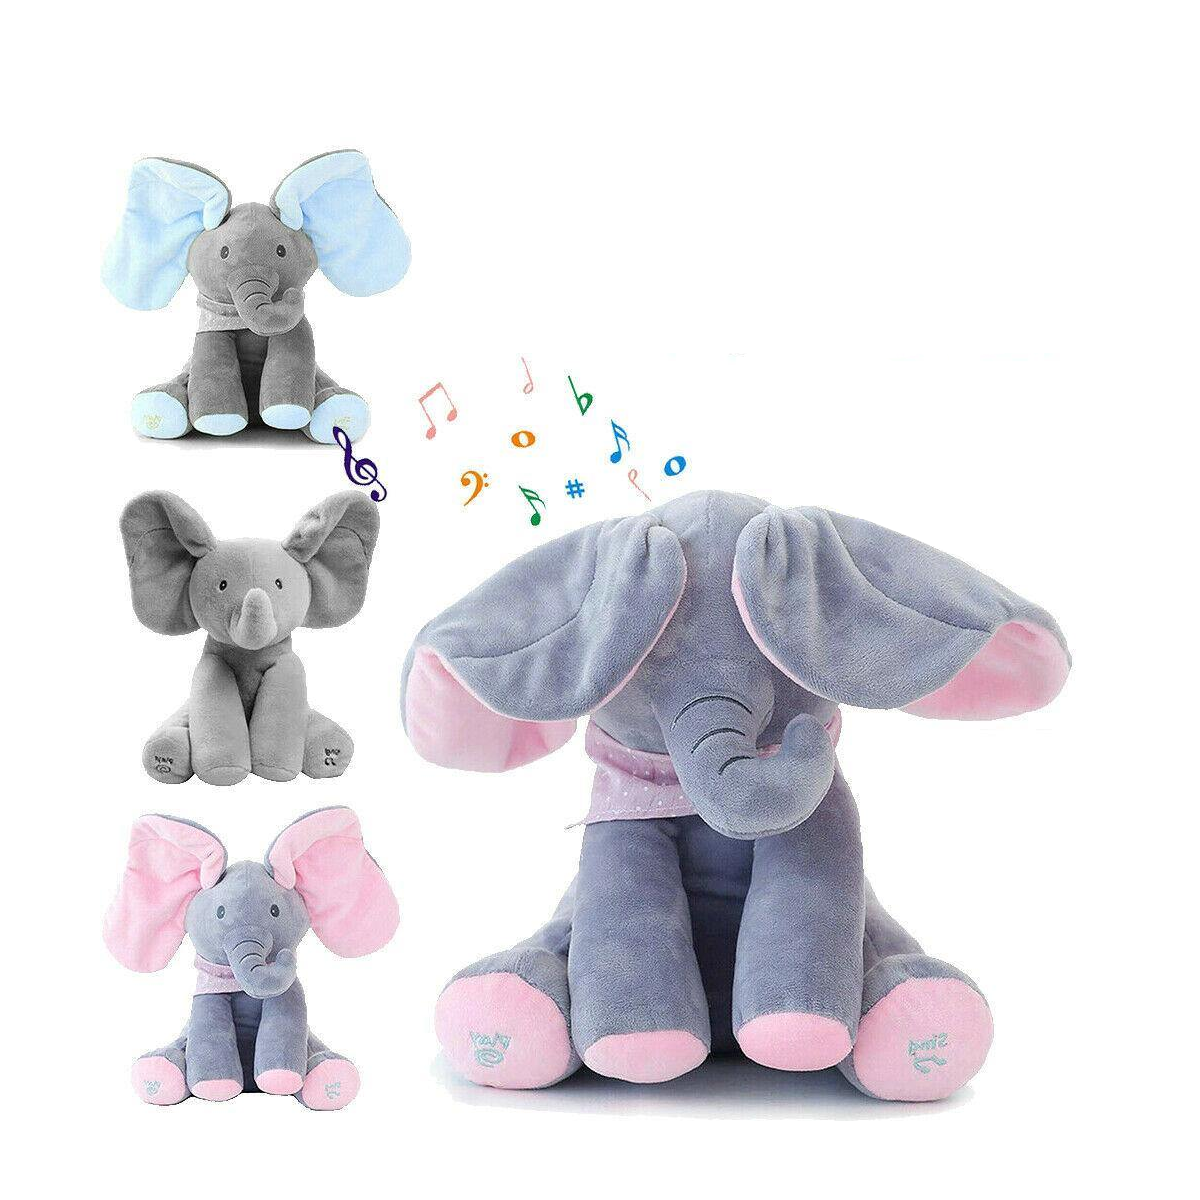 Animated Peek-a-boo Play and Sing Flappy Elephant Educational Toy Collection 